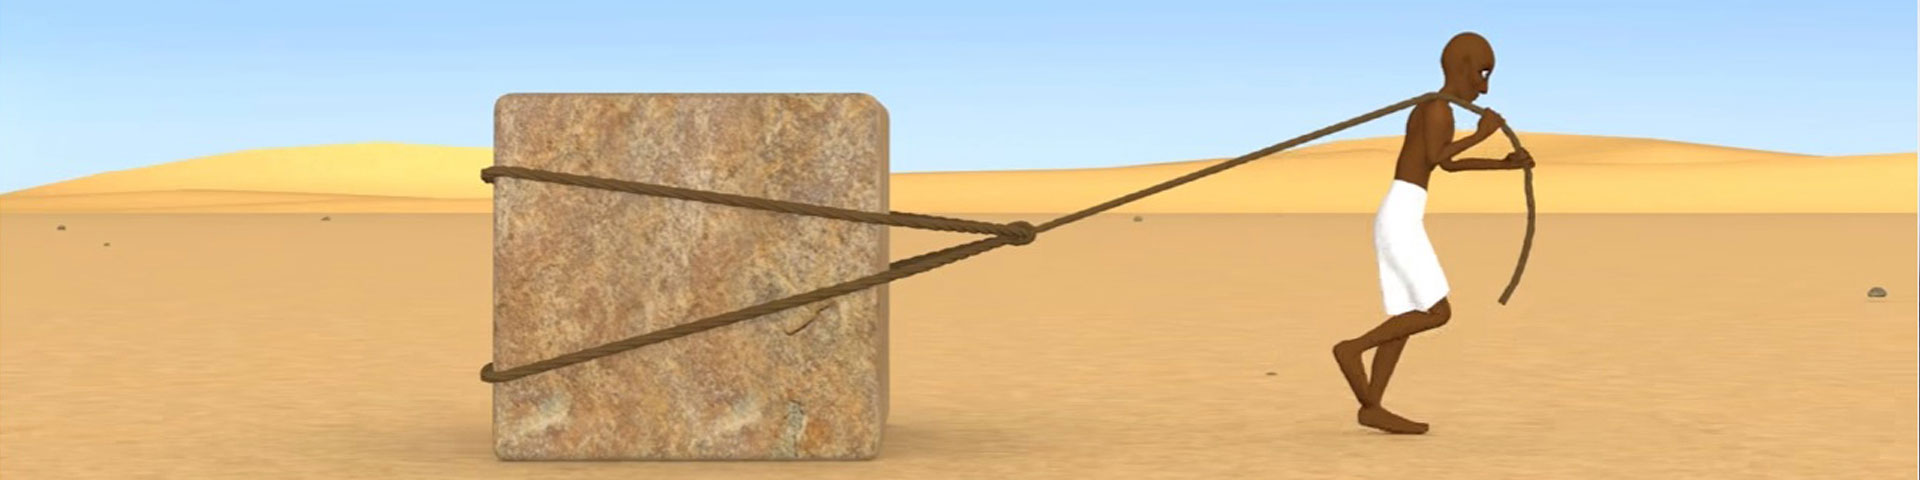 Still from Emma-Louise Osborne's animation about ancient Egypt showing a person dragging a large boulder